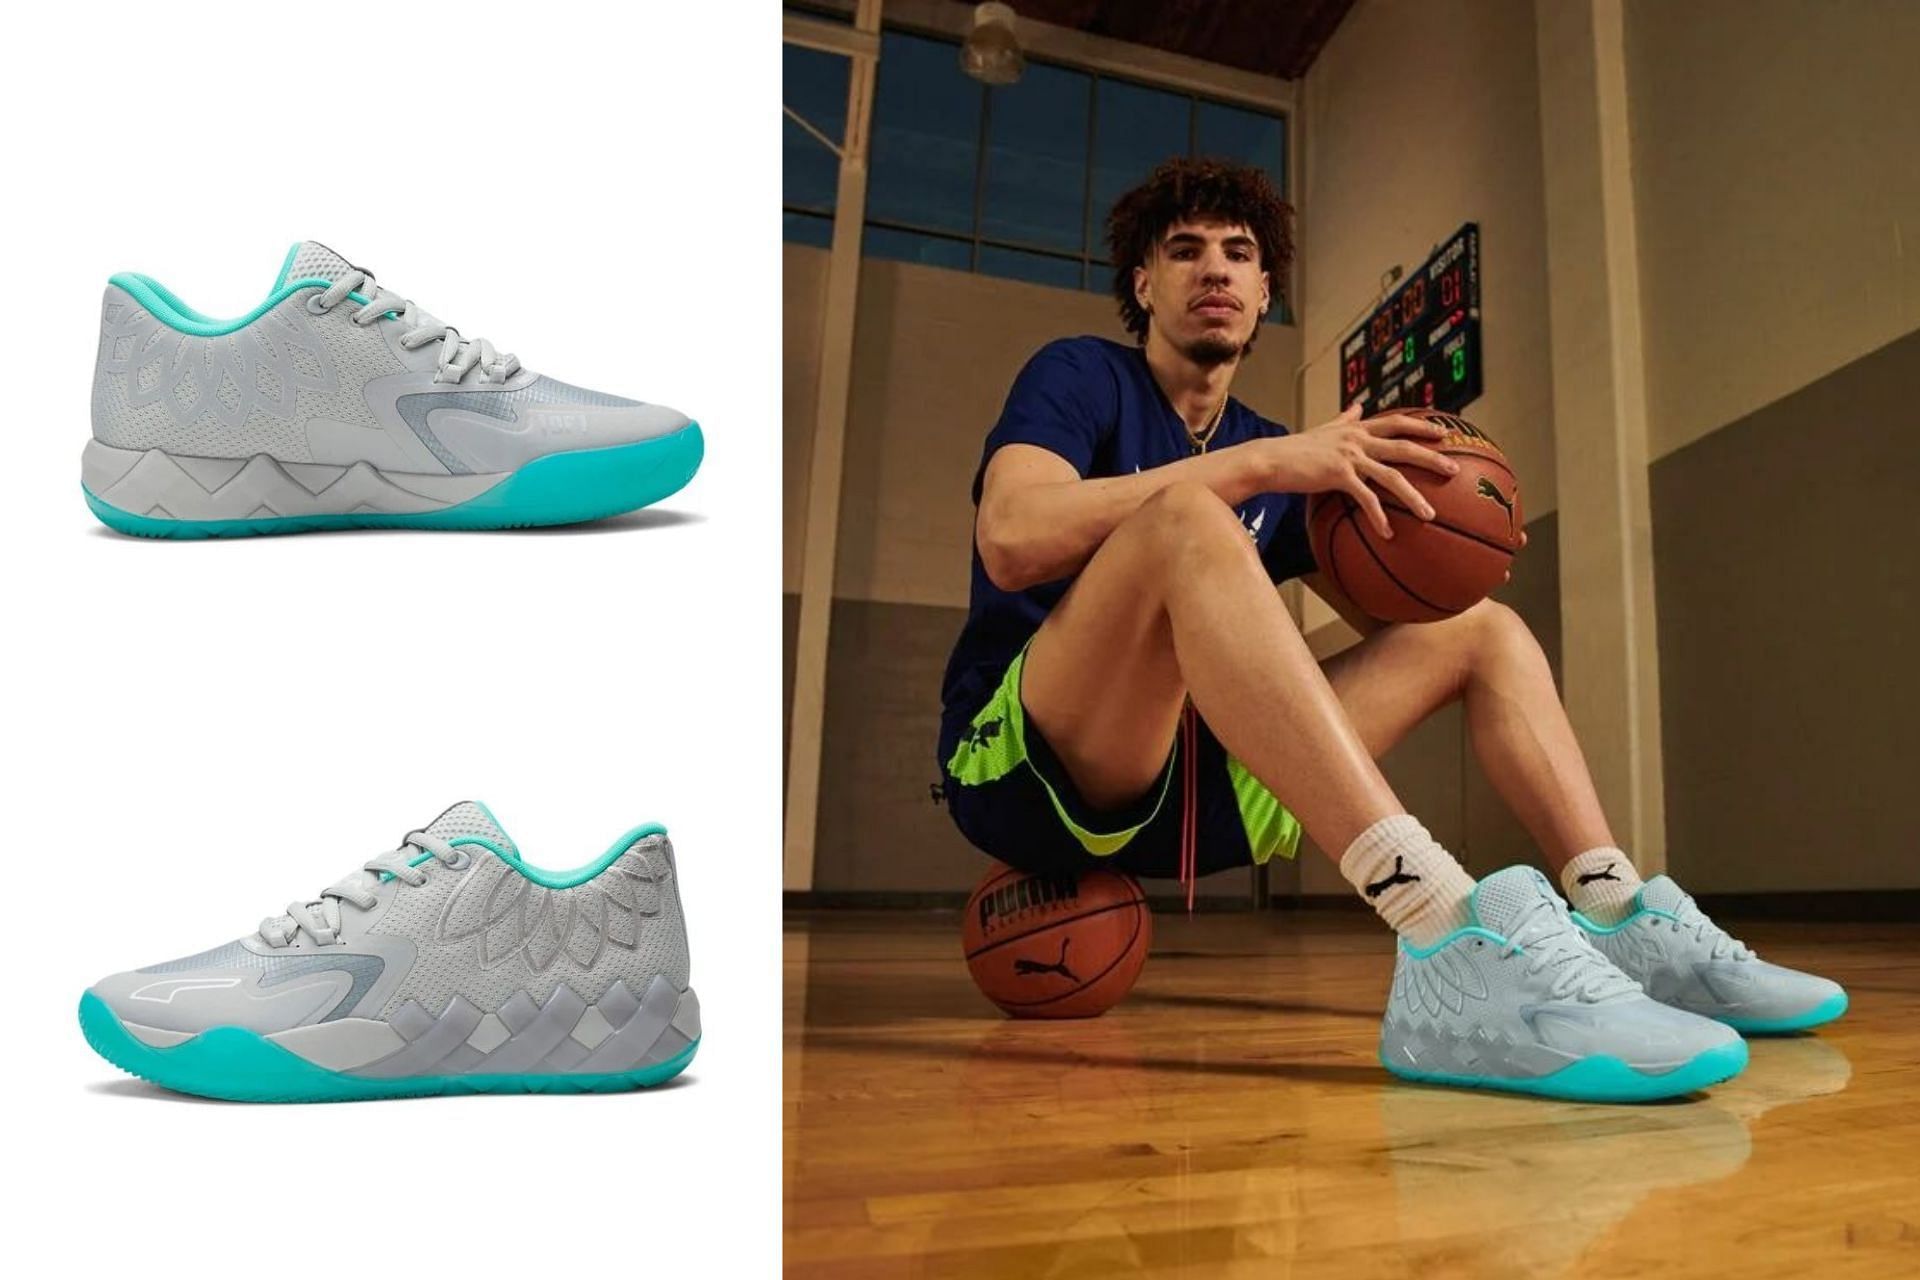 Take a closer look at the UFO shoes (Image via Sportskeeda)